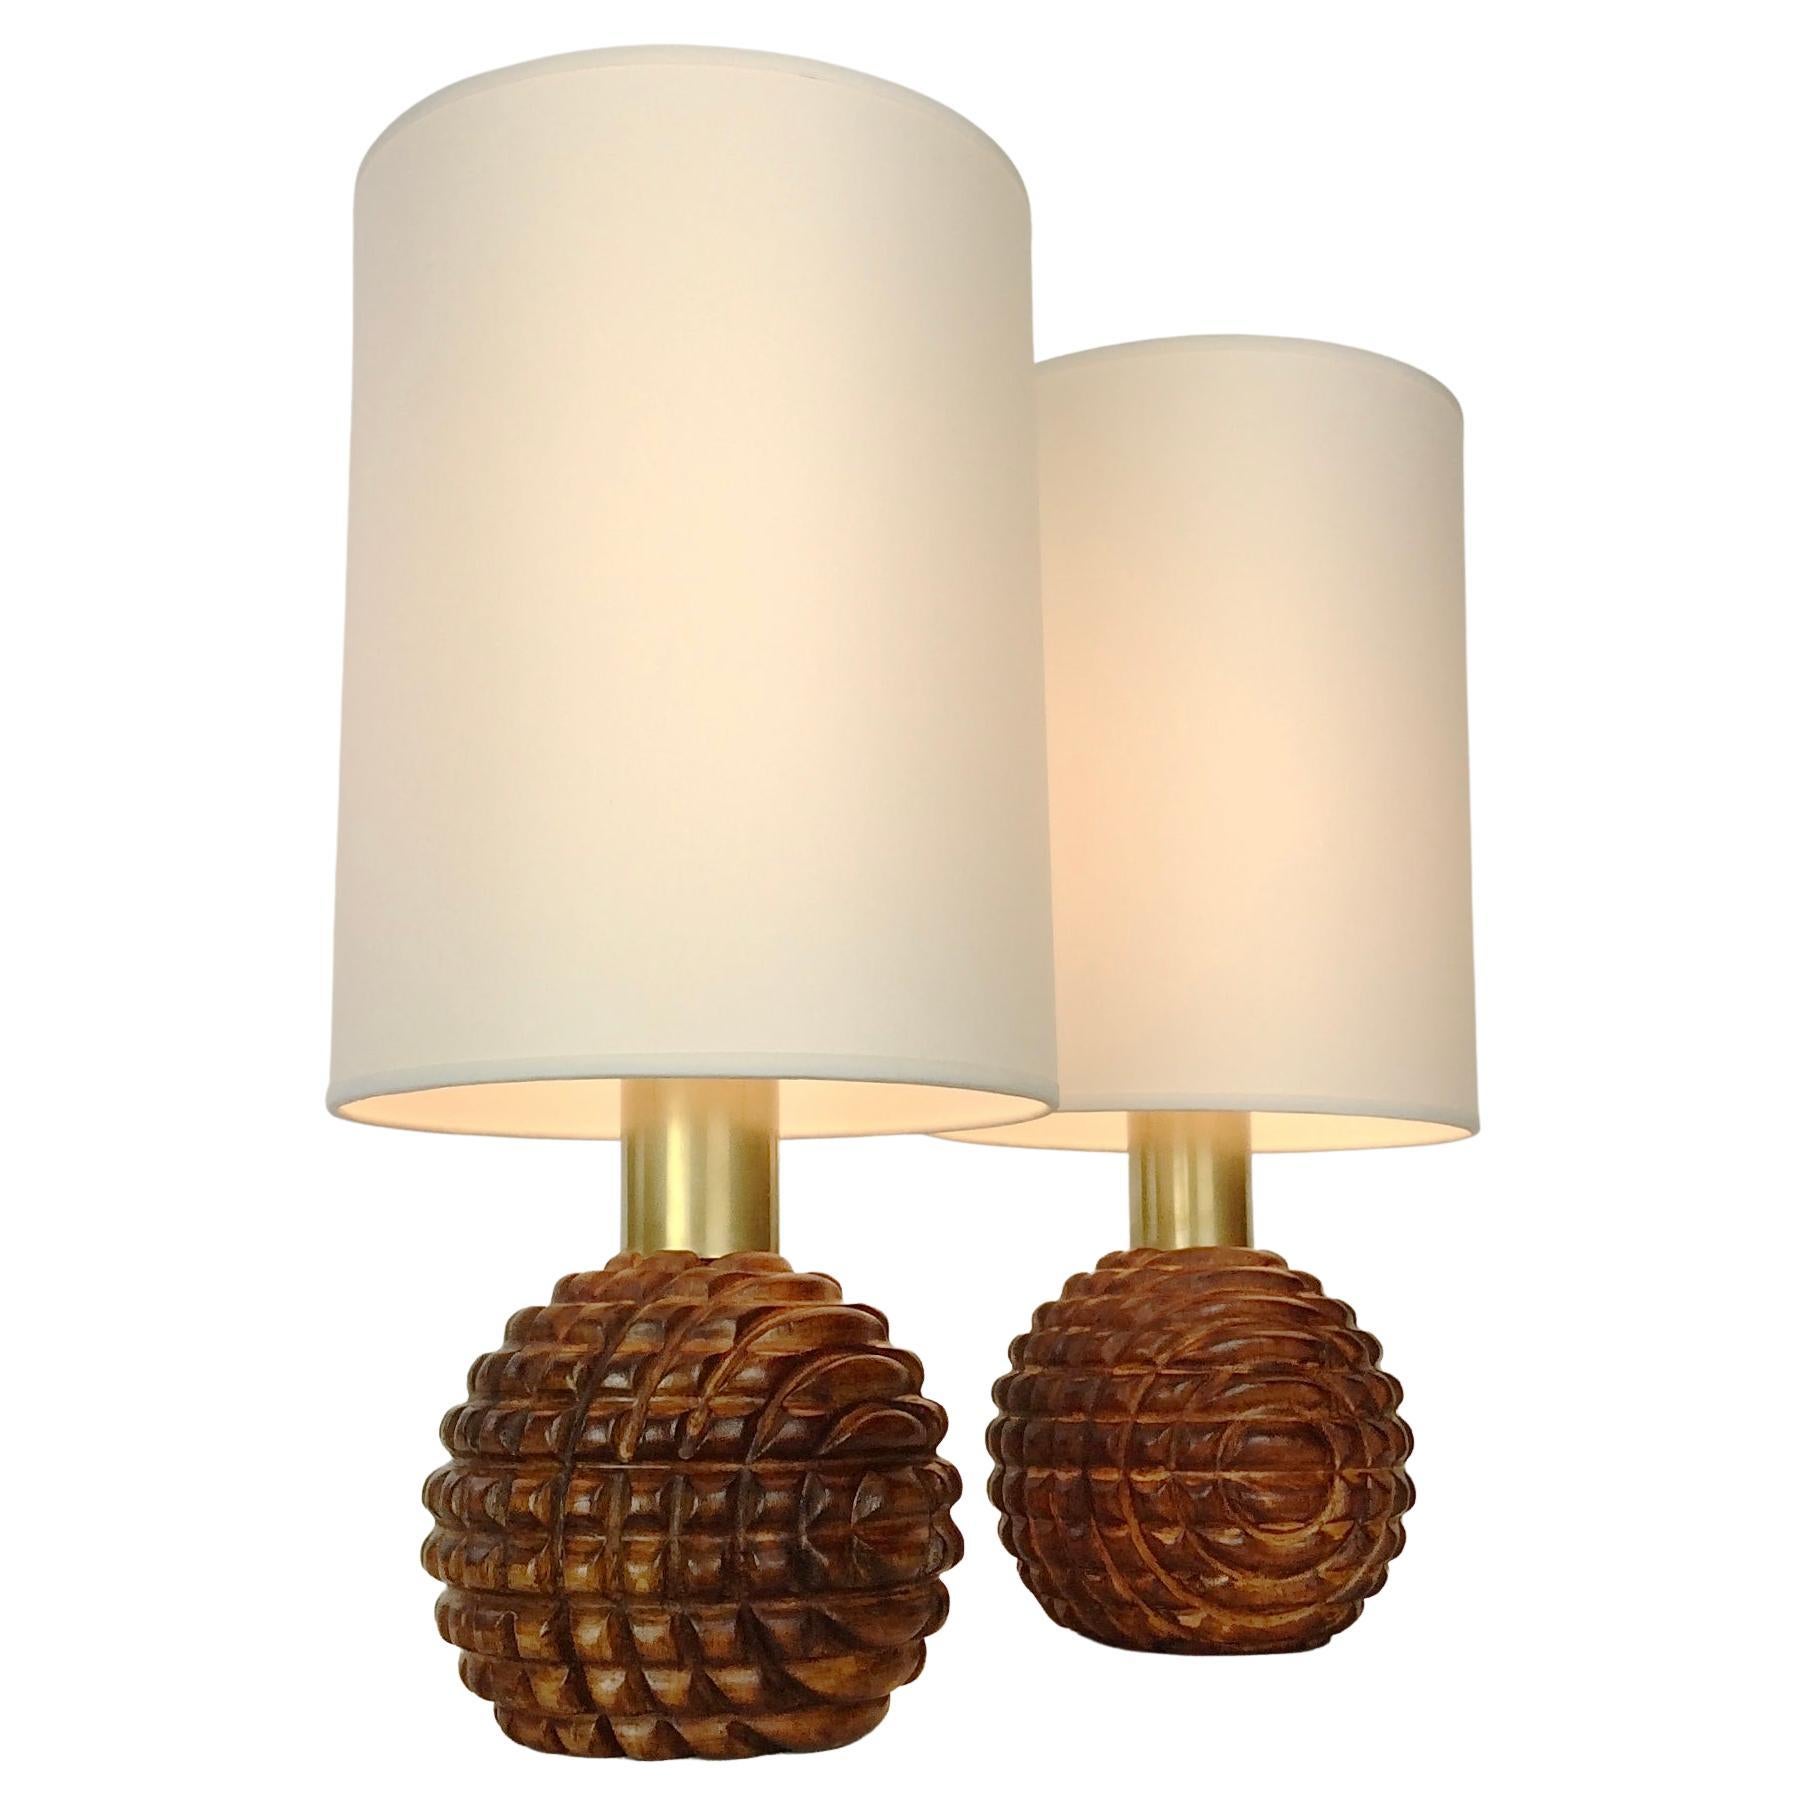 Mid-Century Modern Pair of Carved Wood Table Lamps, circa 1970, Italy